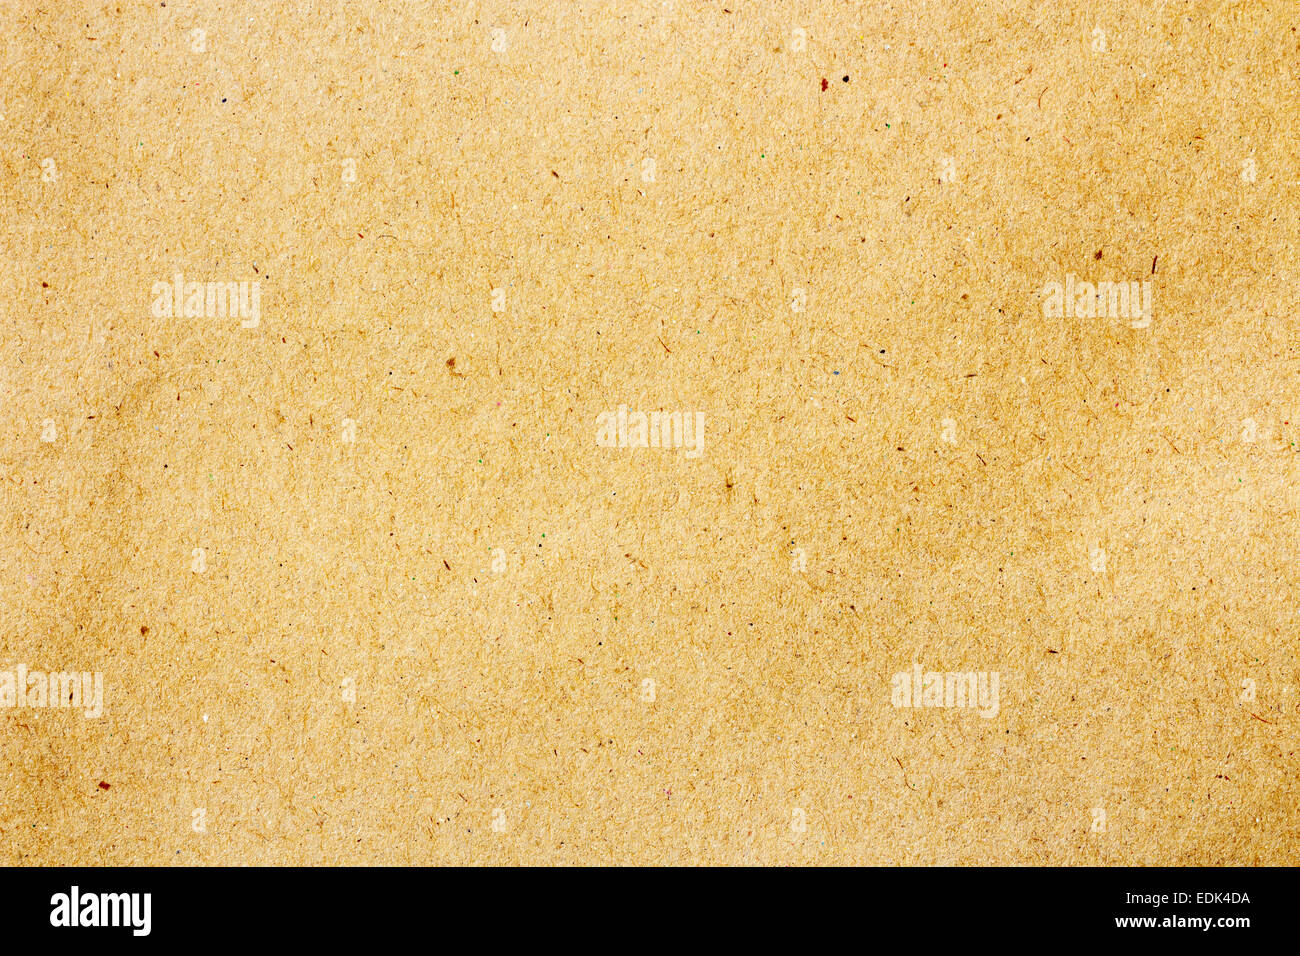 The texture of rough and old recycled paper Stock Photo